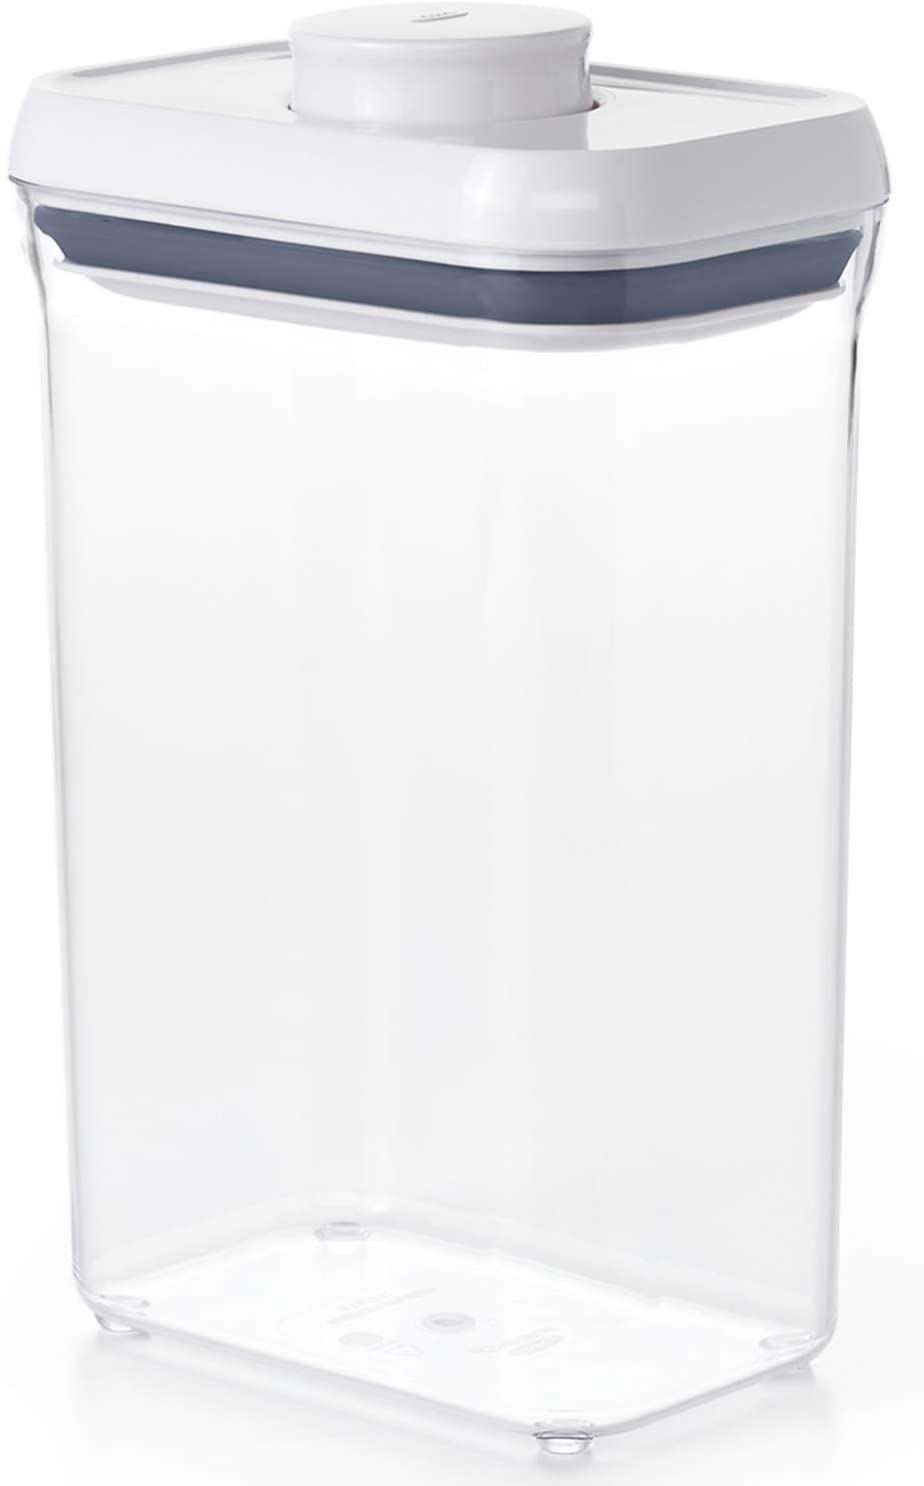 OXO Good Grips POP Large Container, Transparent